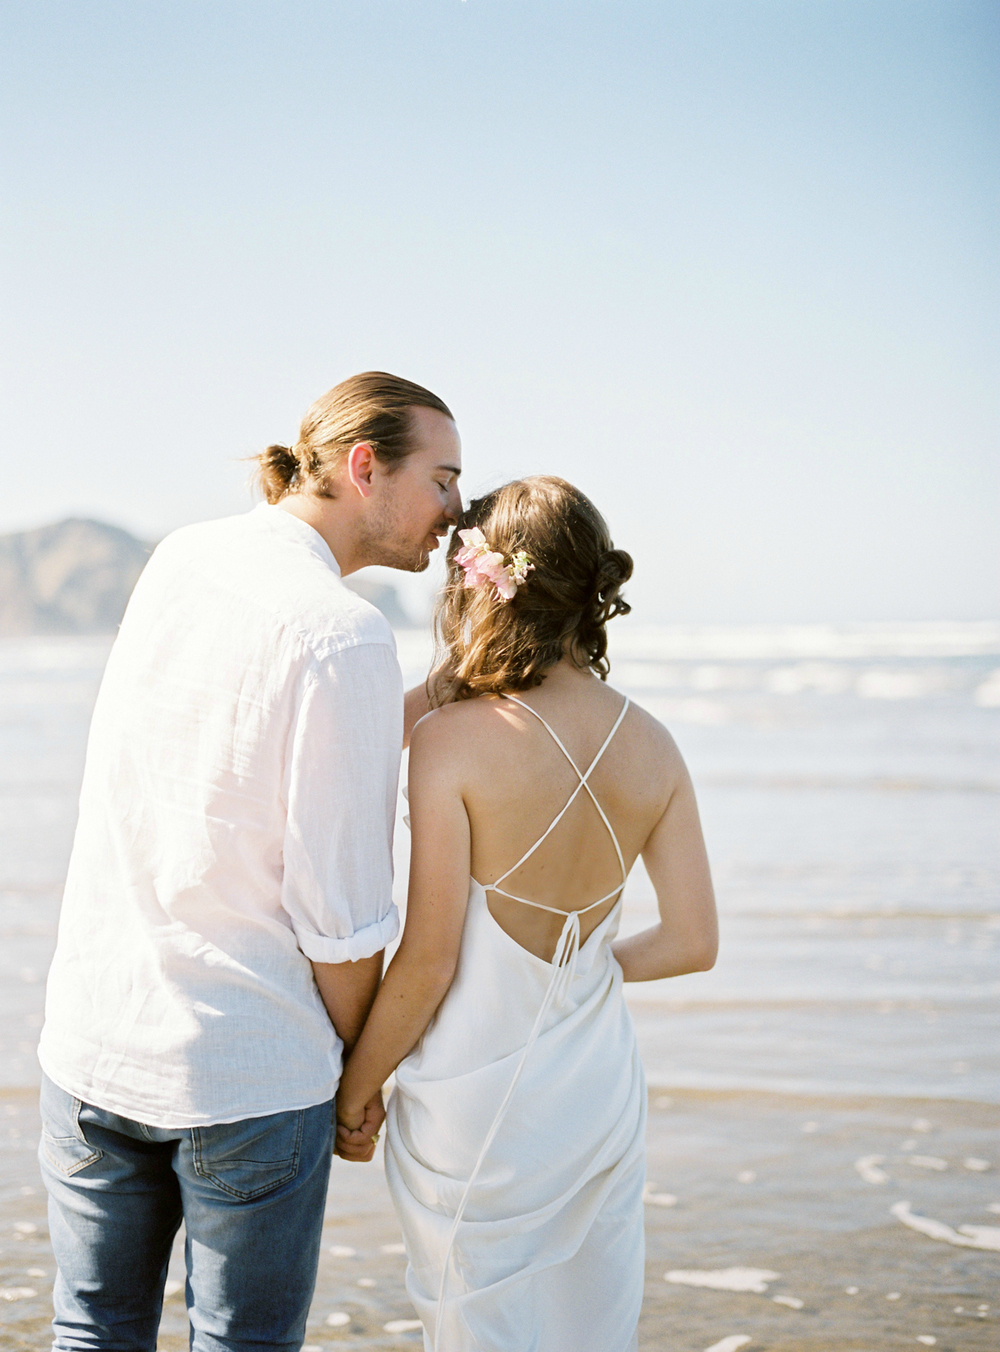 Simple Wedding on the beach in New Zealand